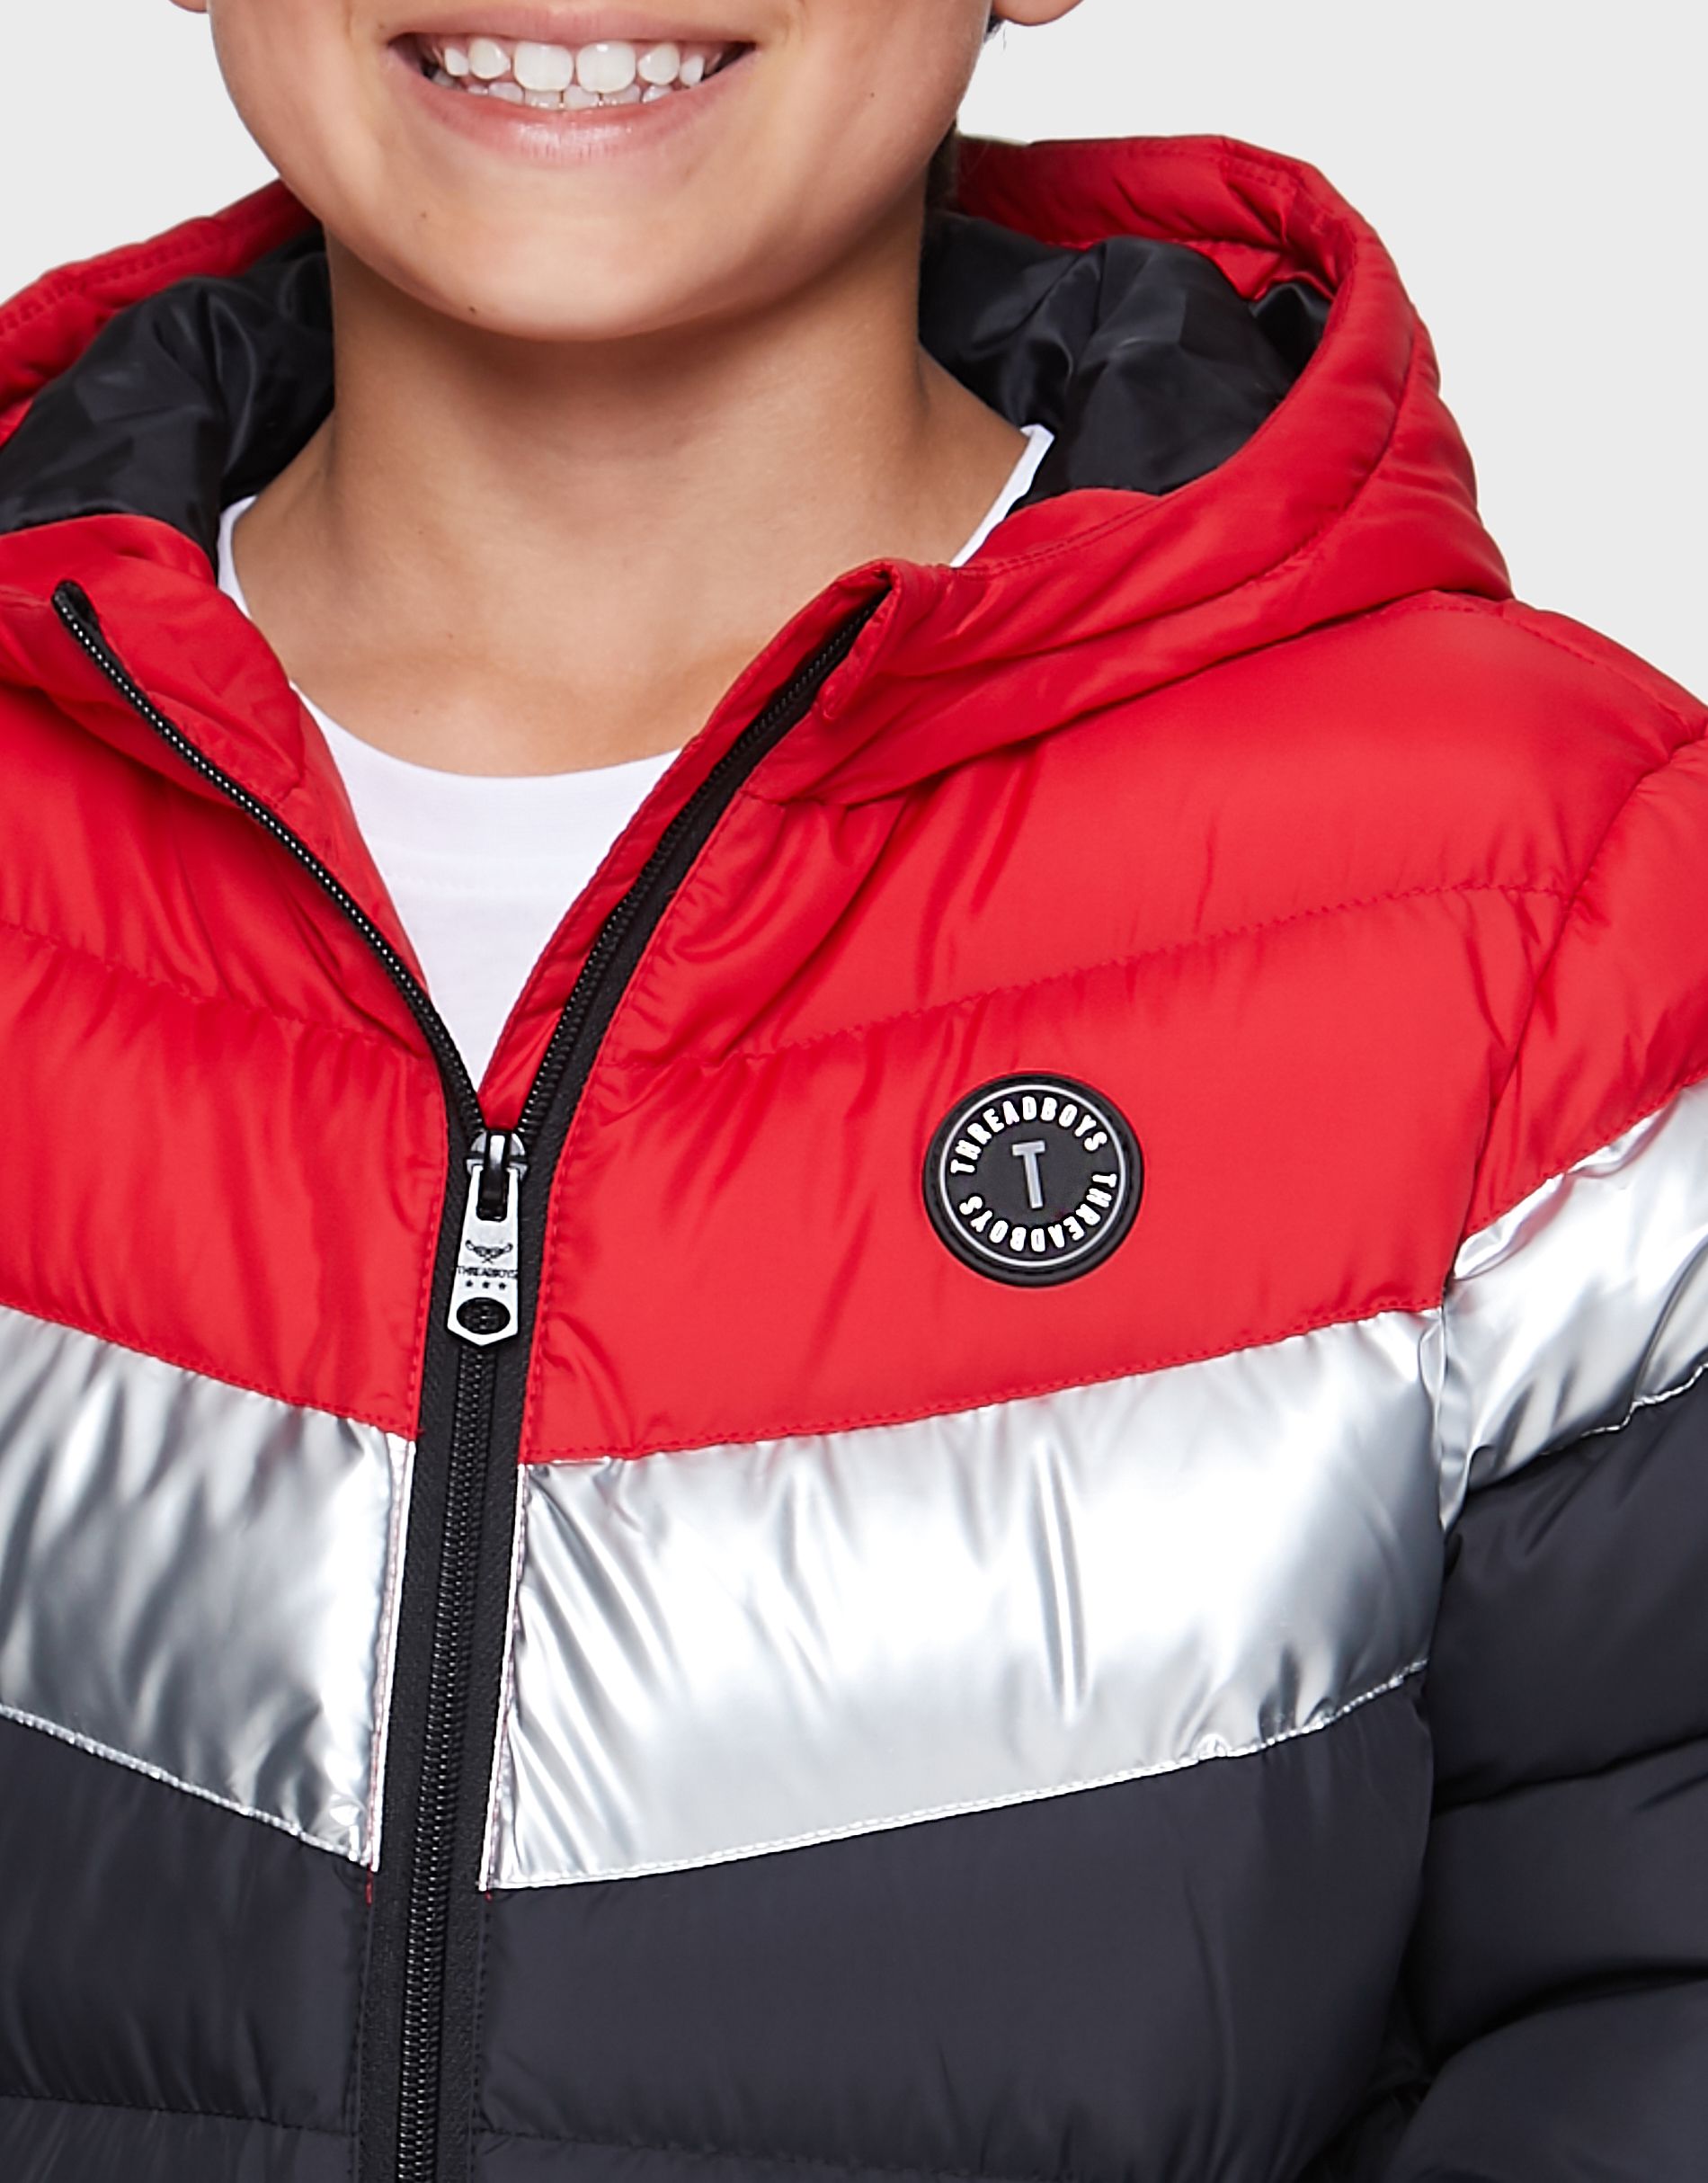 This colourblock style hooded jacket from Threadboys features a zip fastening, two side pockets and branding badge on the chest. It has an elasticated hem and cuffs, an essential for this season. Other colour and styles available.